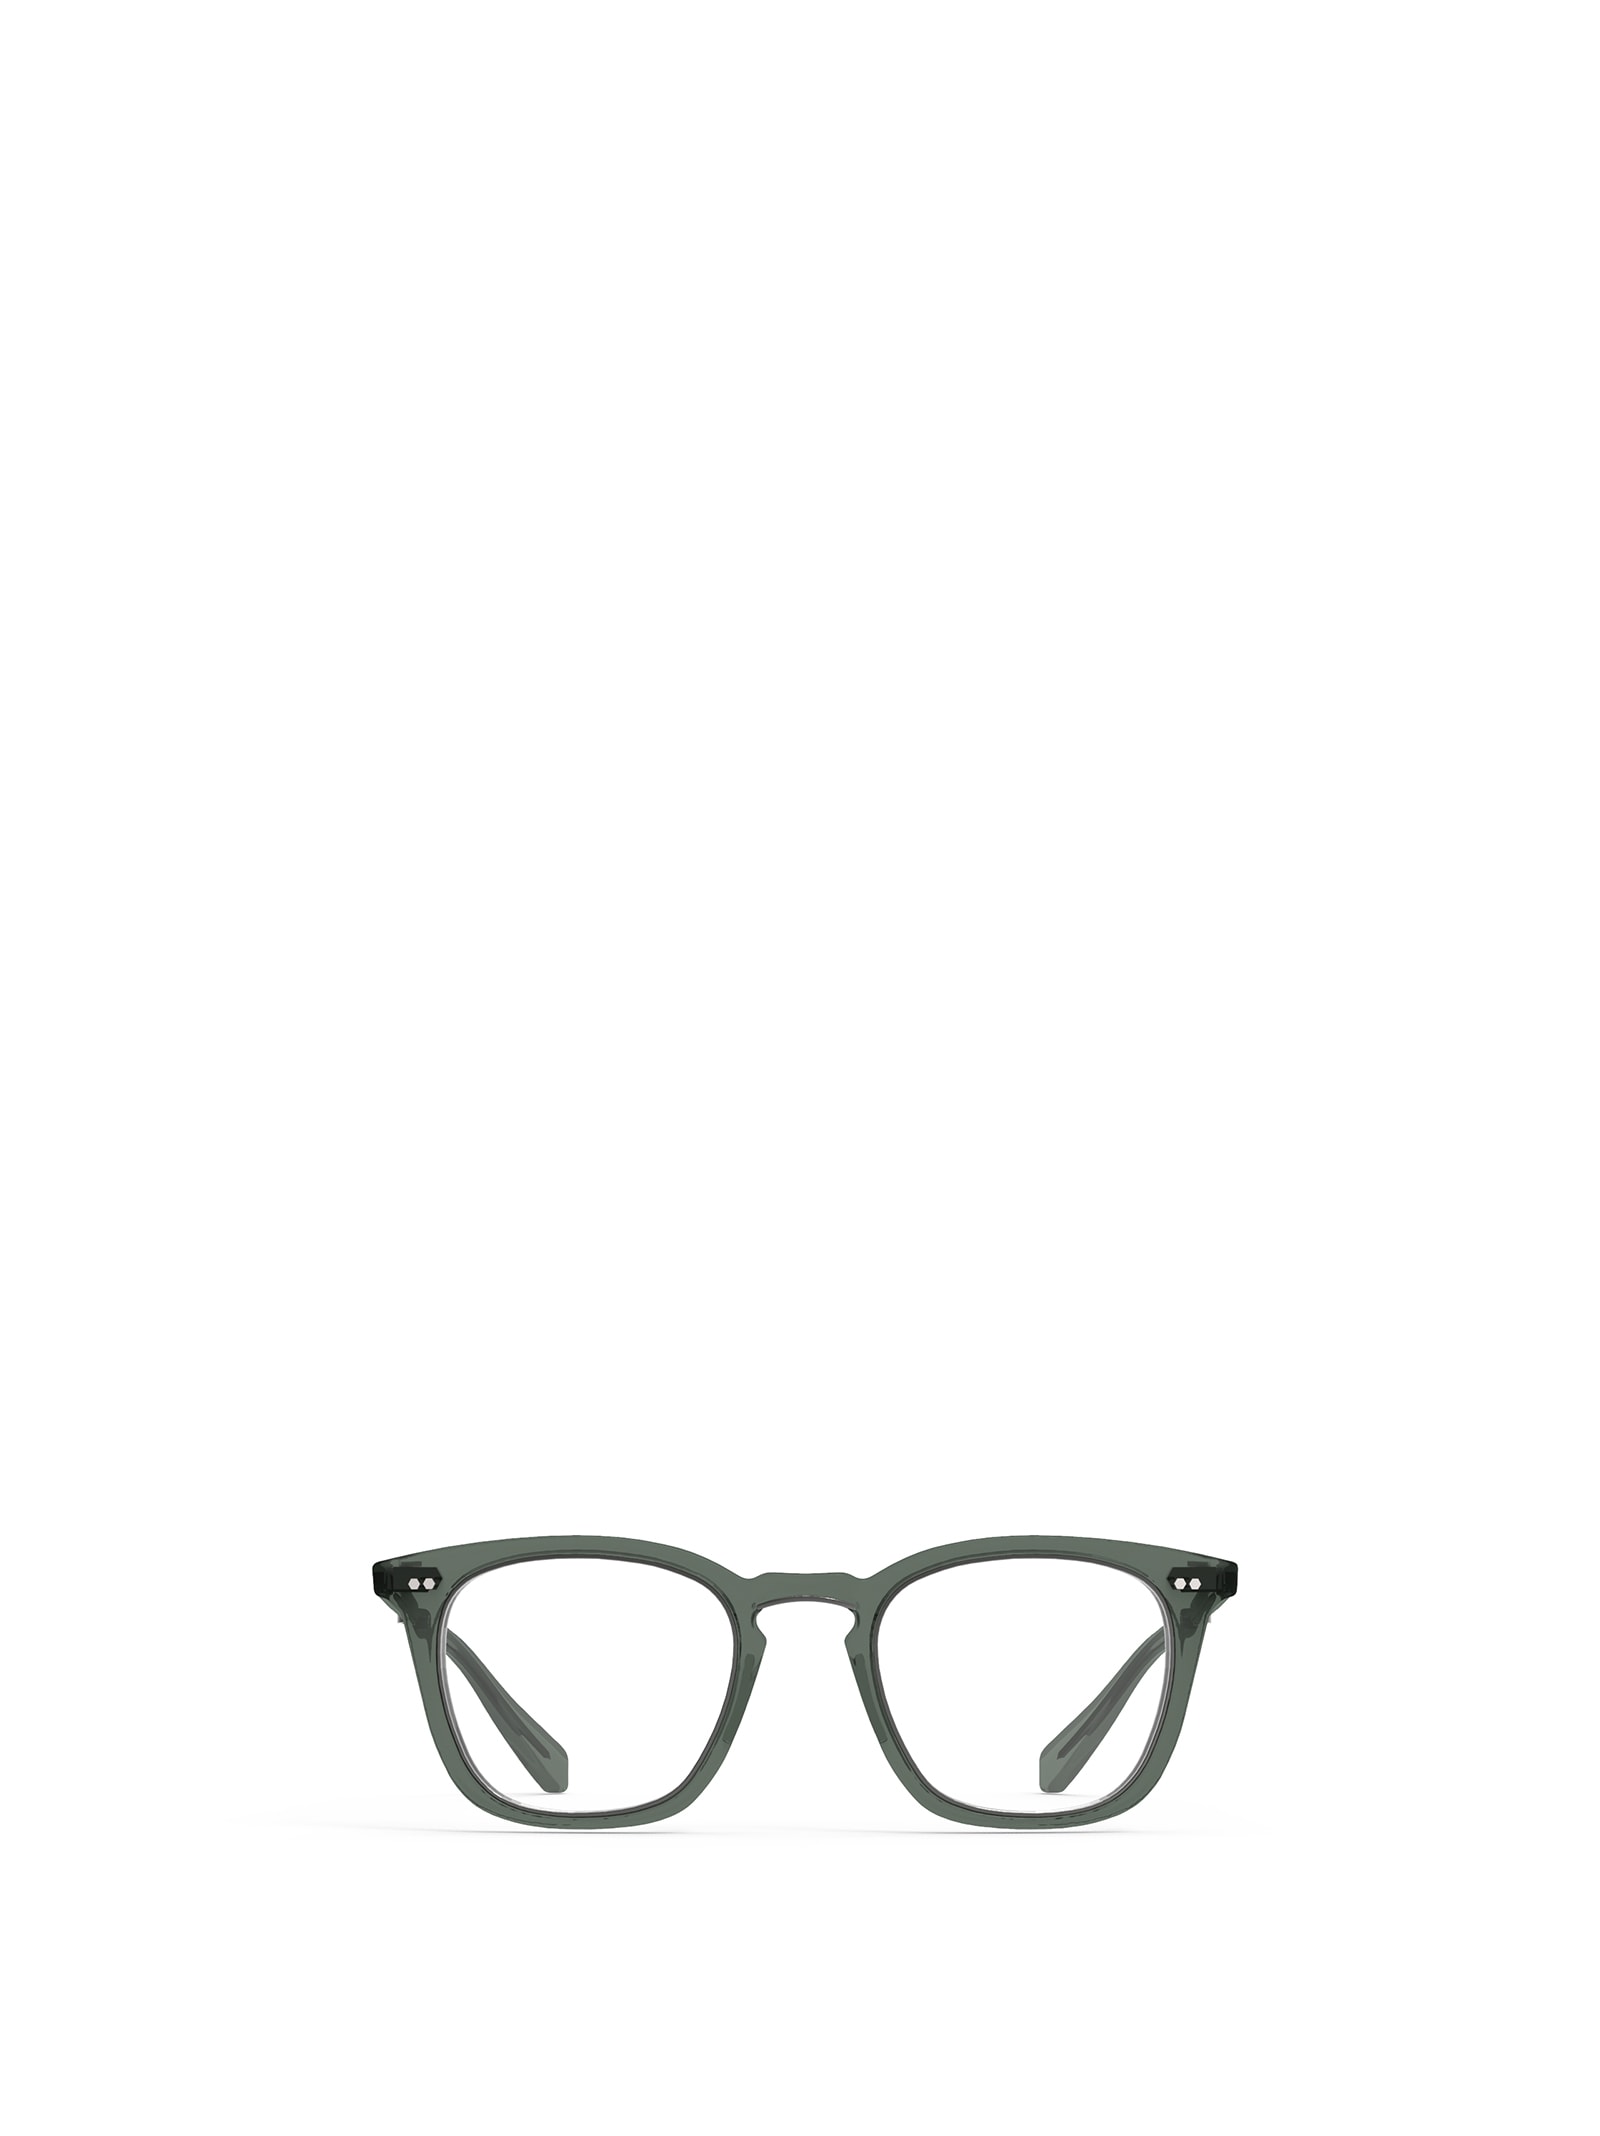 MR. LEIGHT GETTY II C GREY SAGE-PEWTER GLASSES